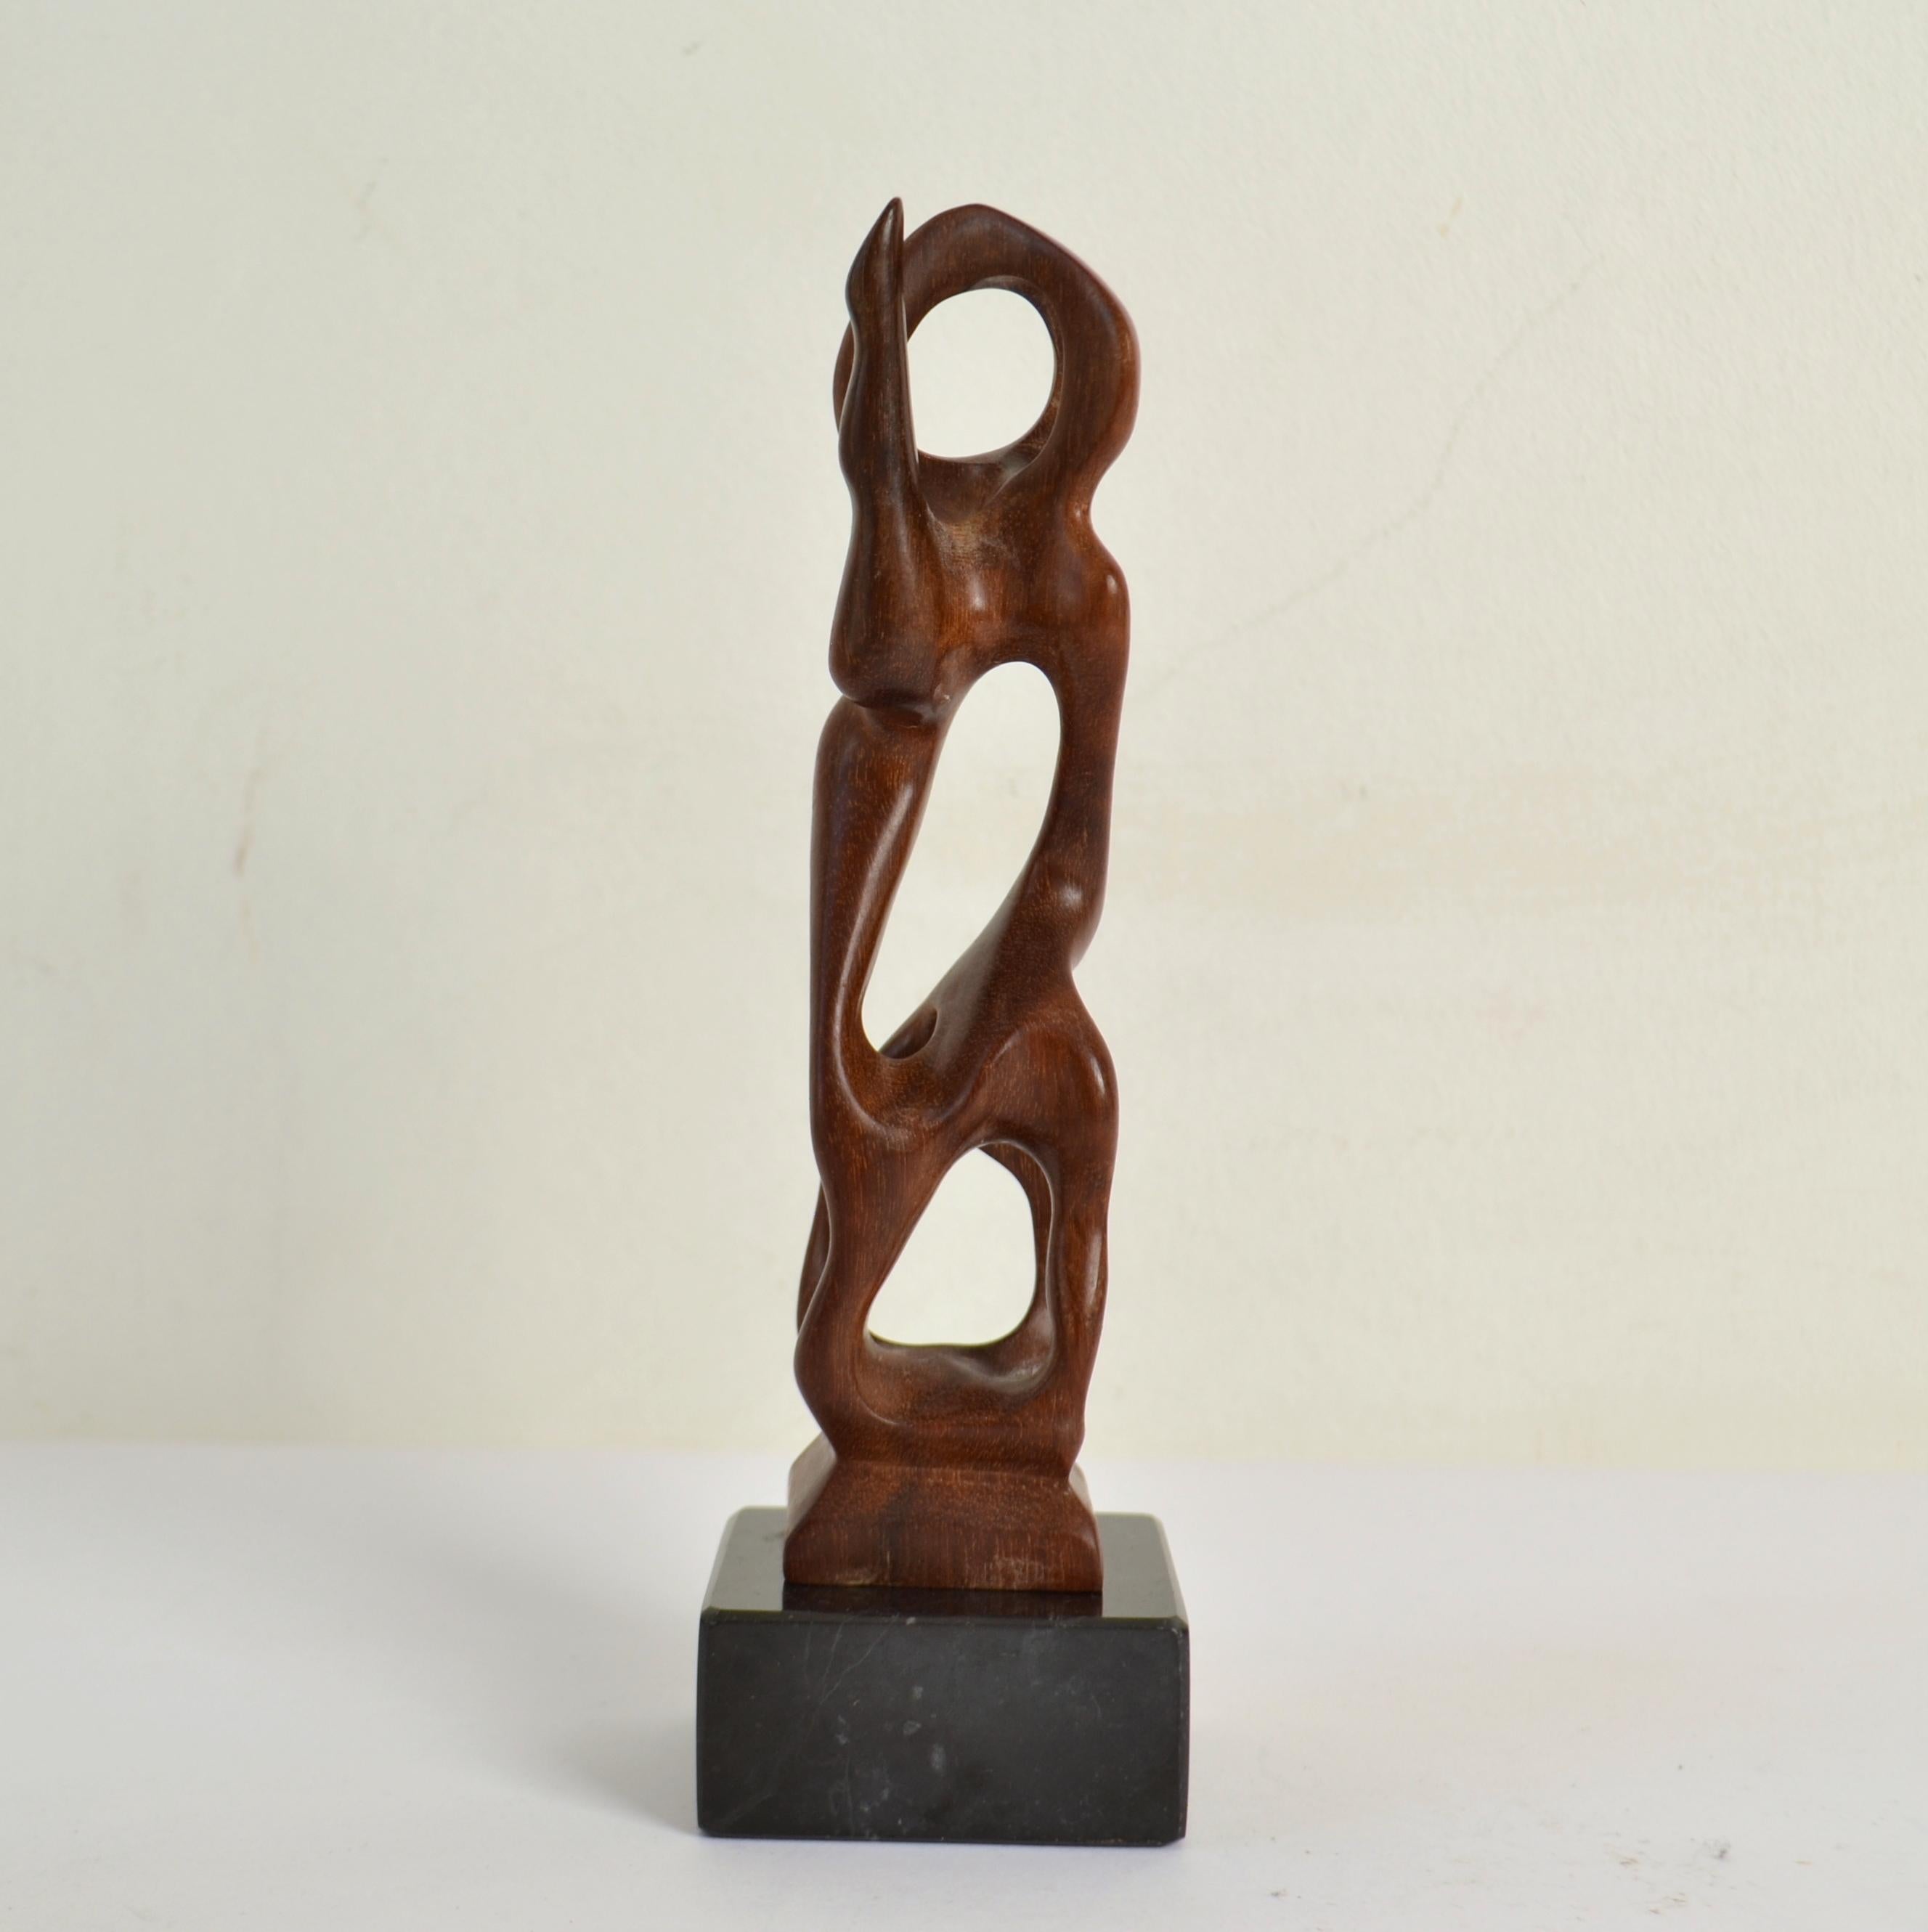 Hand-Carved Hand Carved Biomorphic Wooden Sculptures